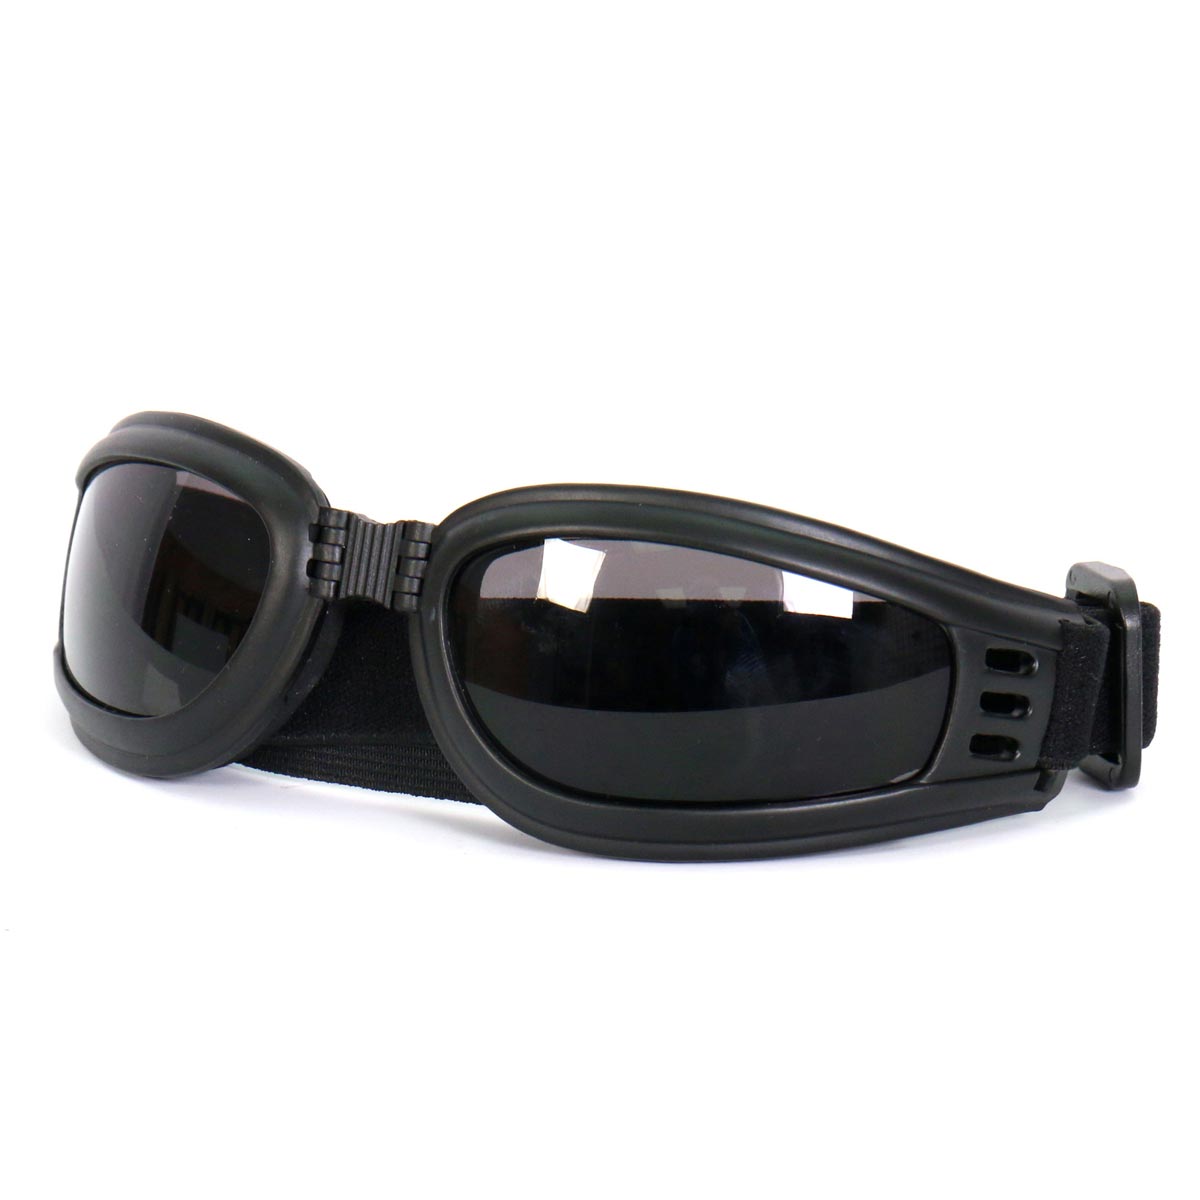 Hot Leathers SGG1016 Smoke Nomad Sunglasses/Goggles